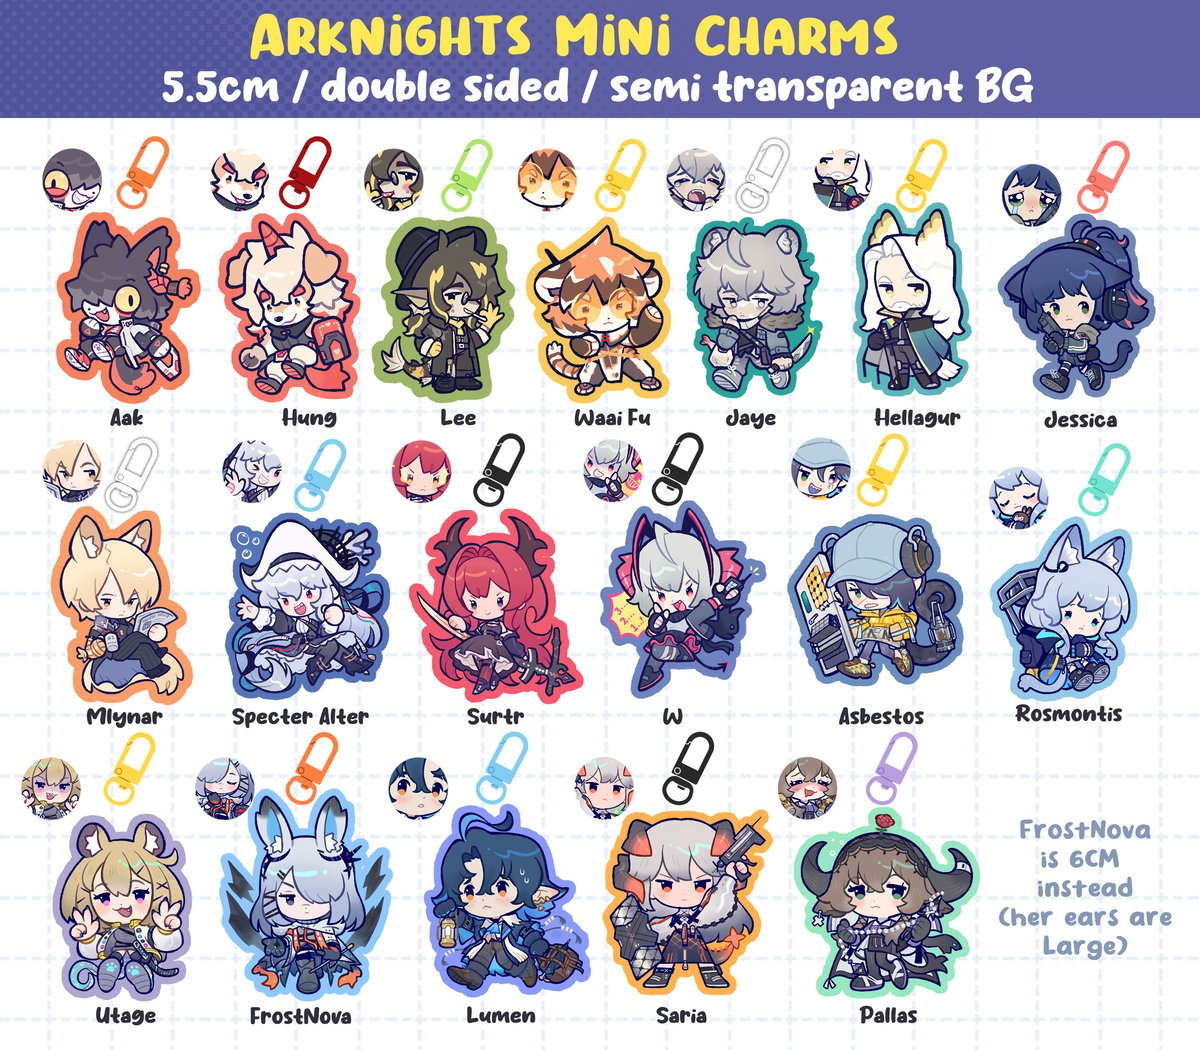 PREORDER) Arknights Mini Charms